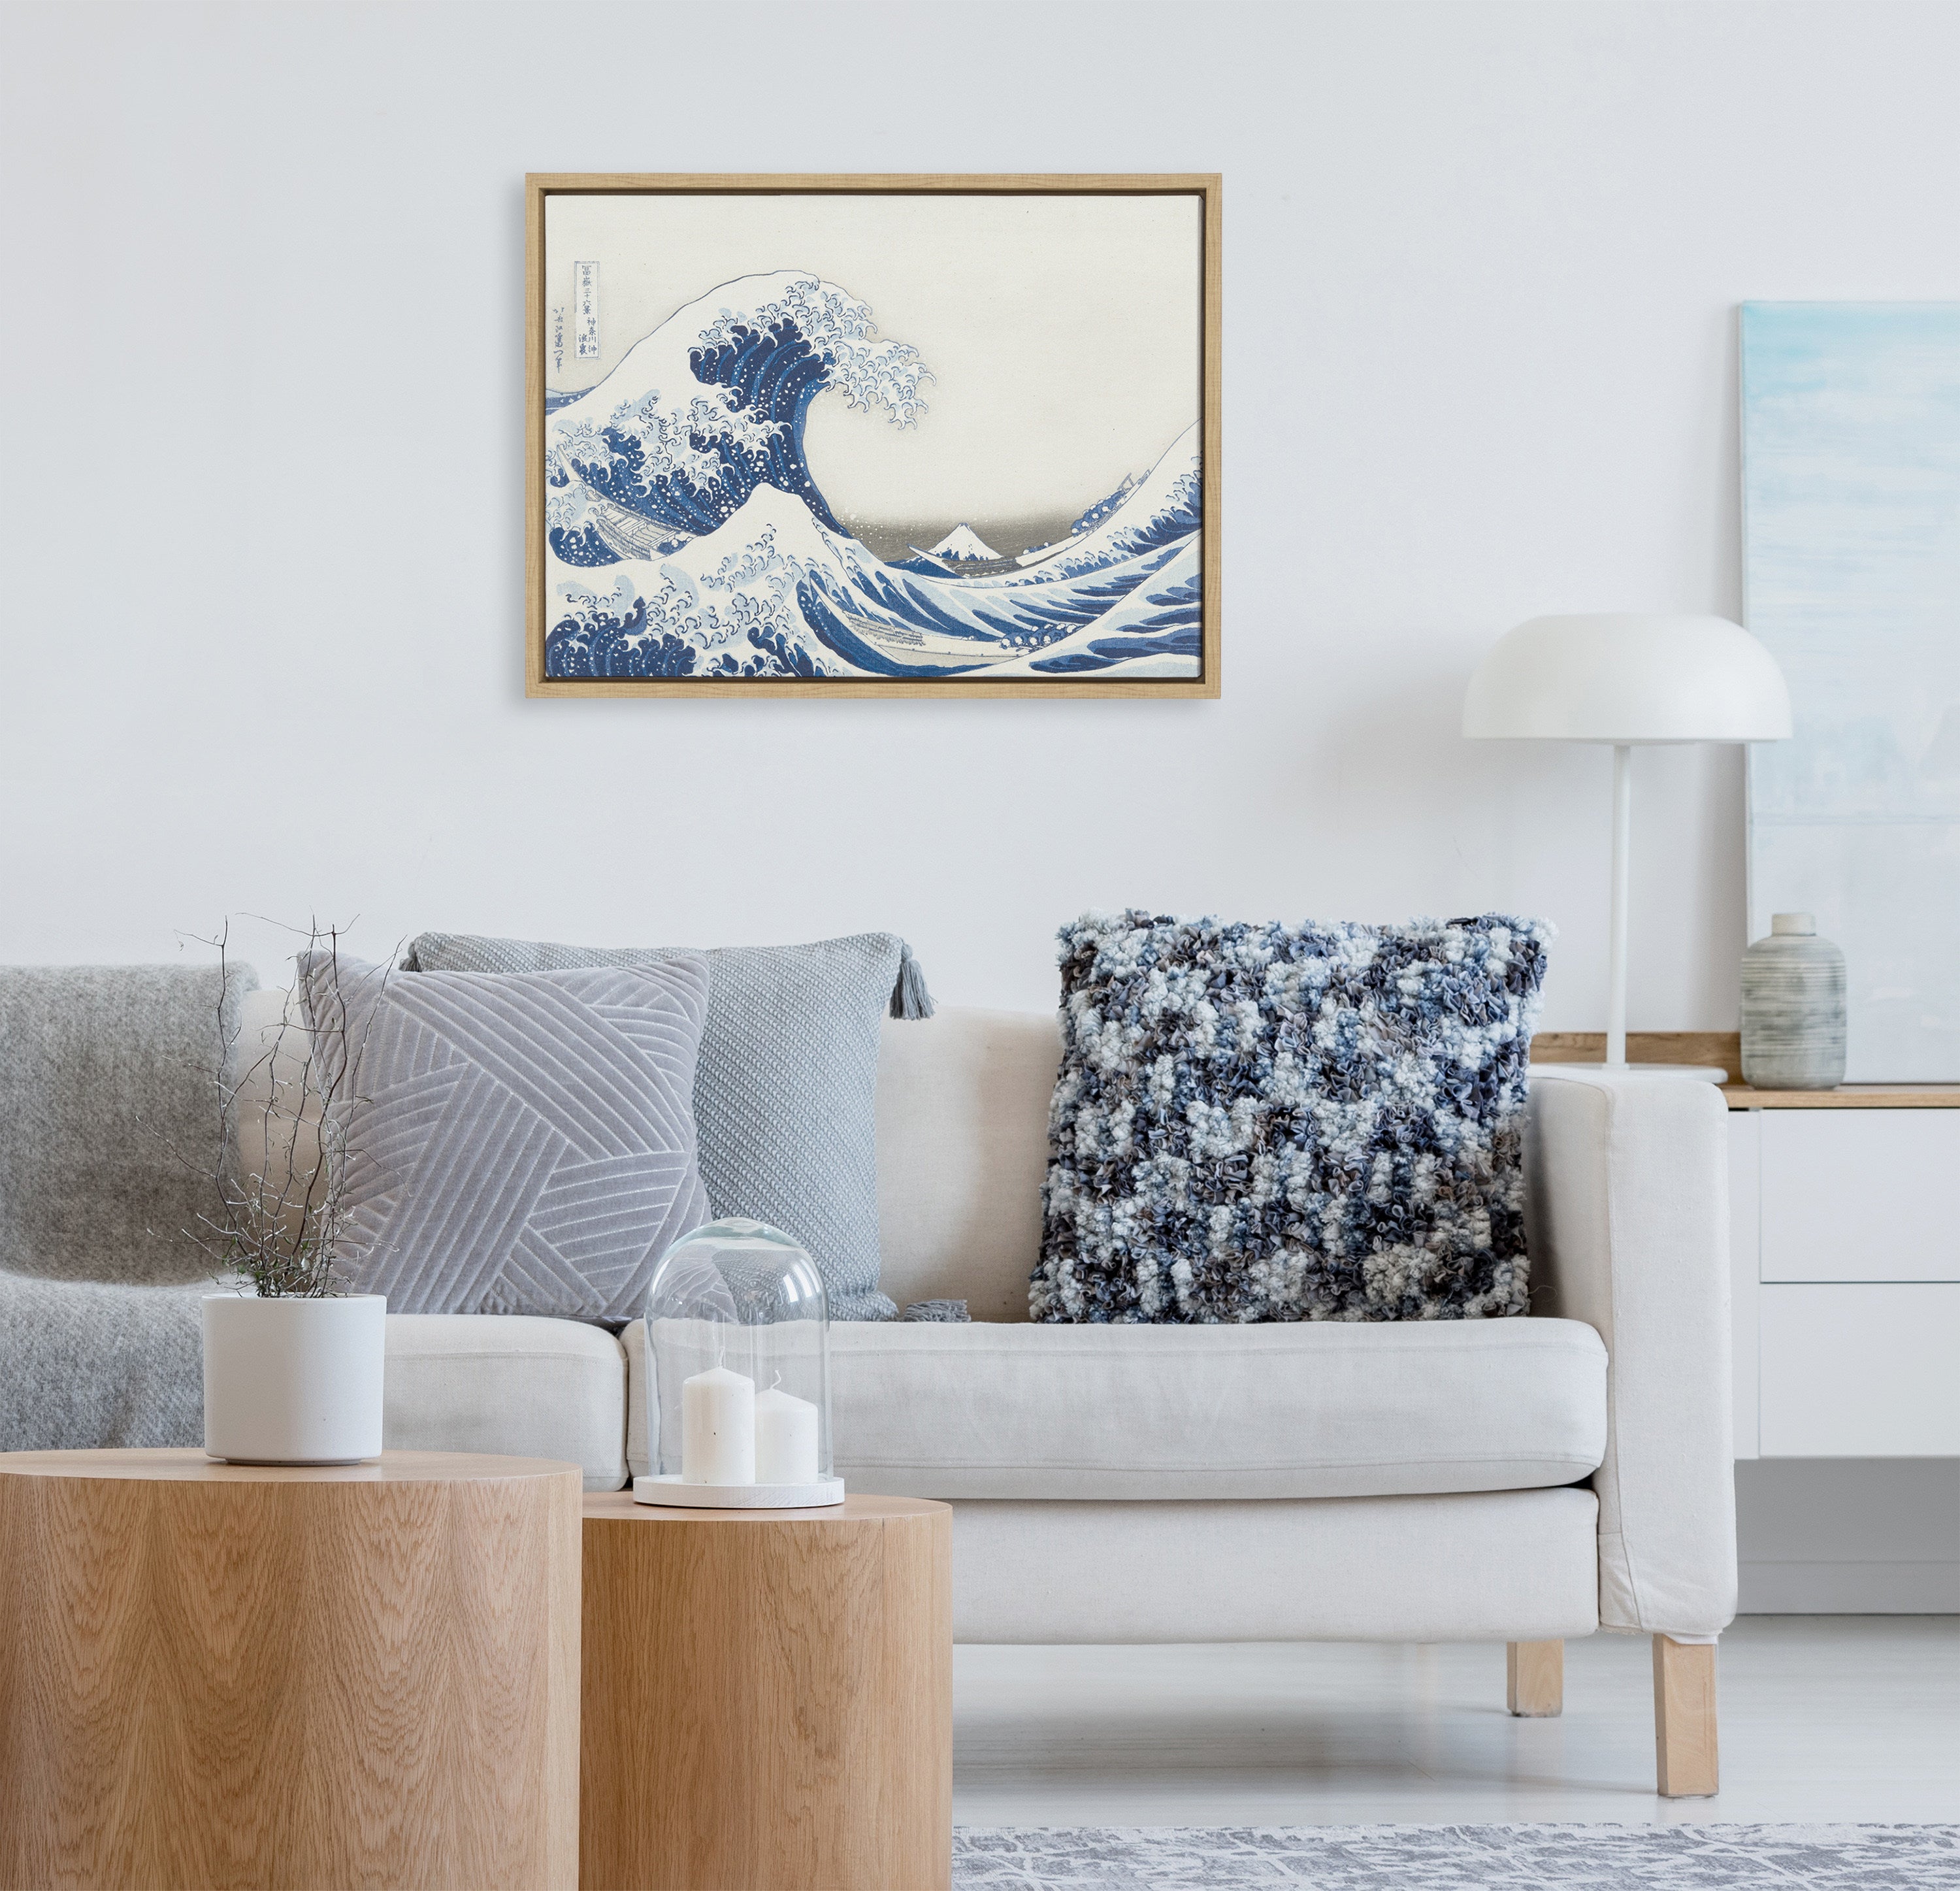 Sylvie Katsushika Hokusai Under the Wave off Kanagawa aka The Great Wave 1830 Framed Canvas by The Art Institute of Chicago